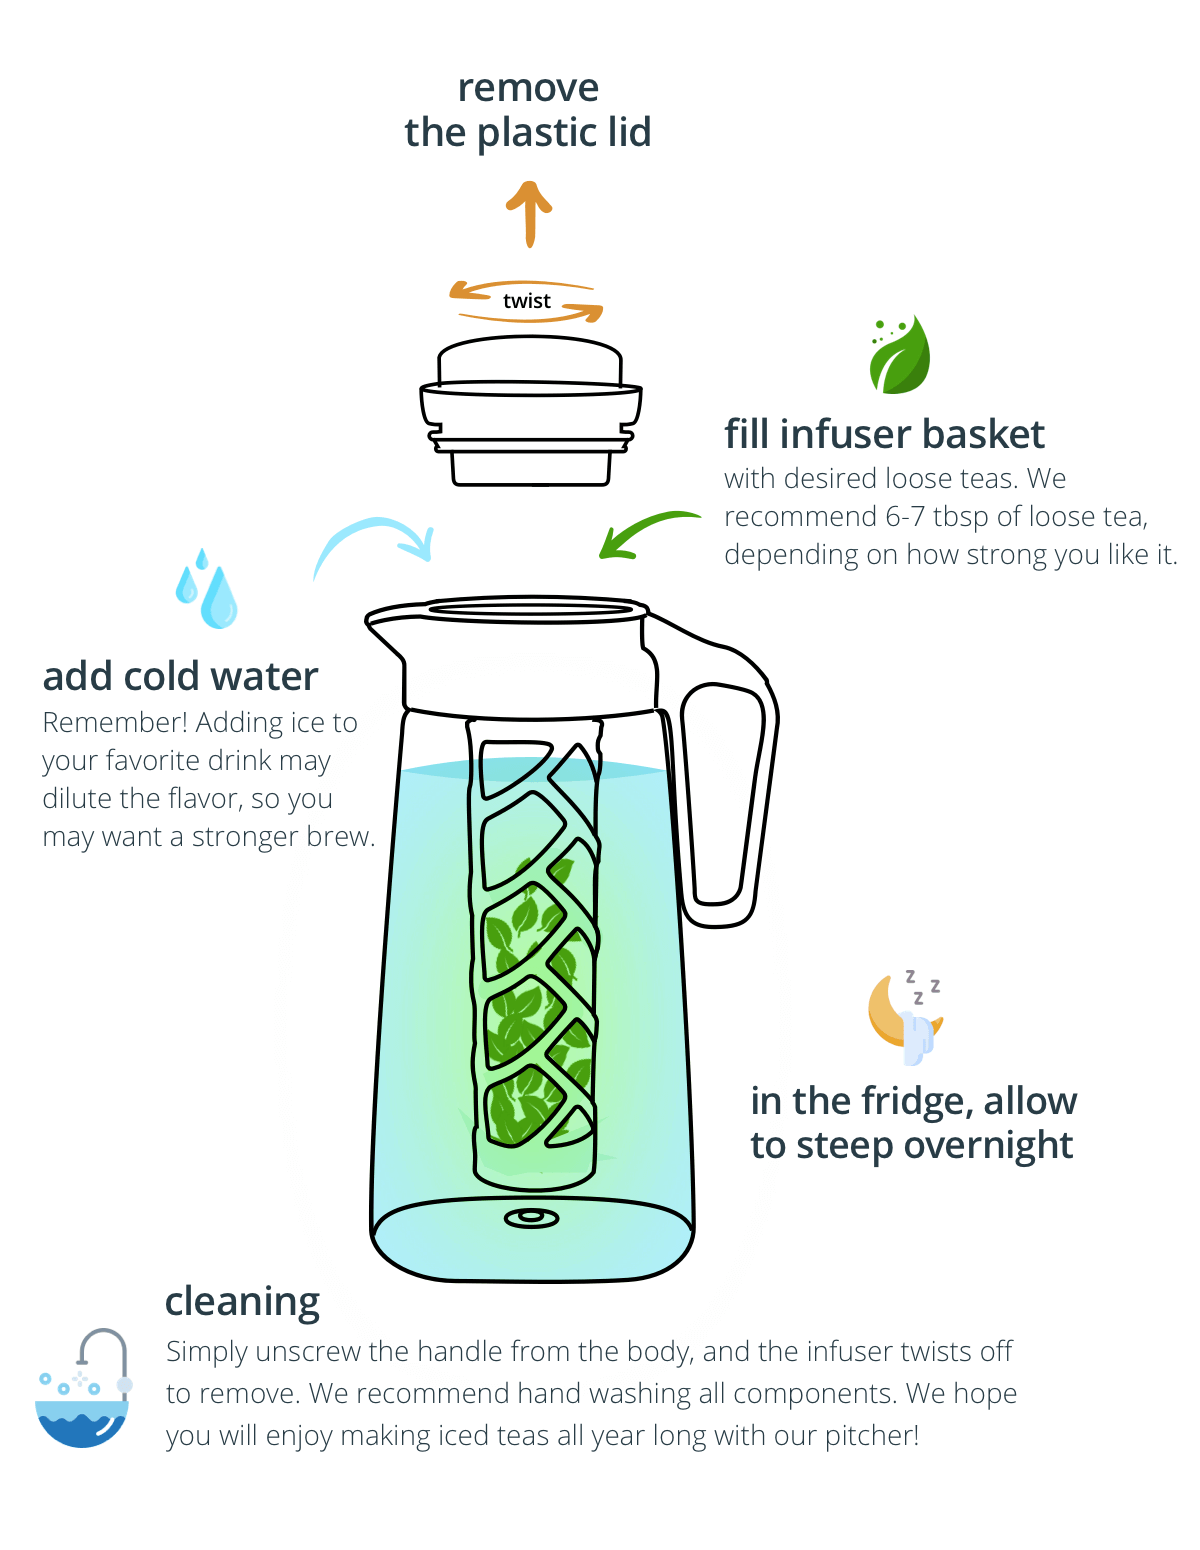 https://www.adagio.com/images6/airtight_pitcher_instructions.png